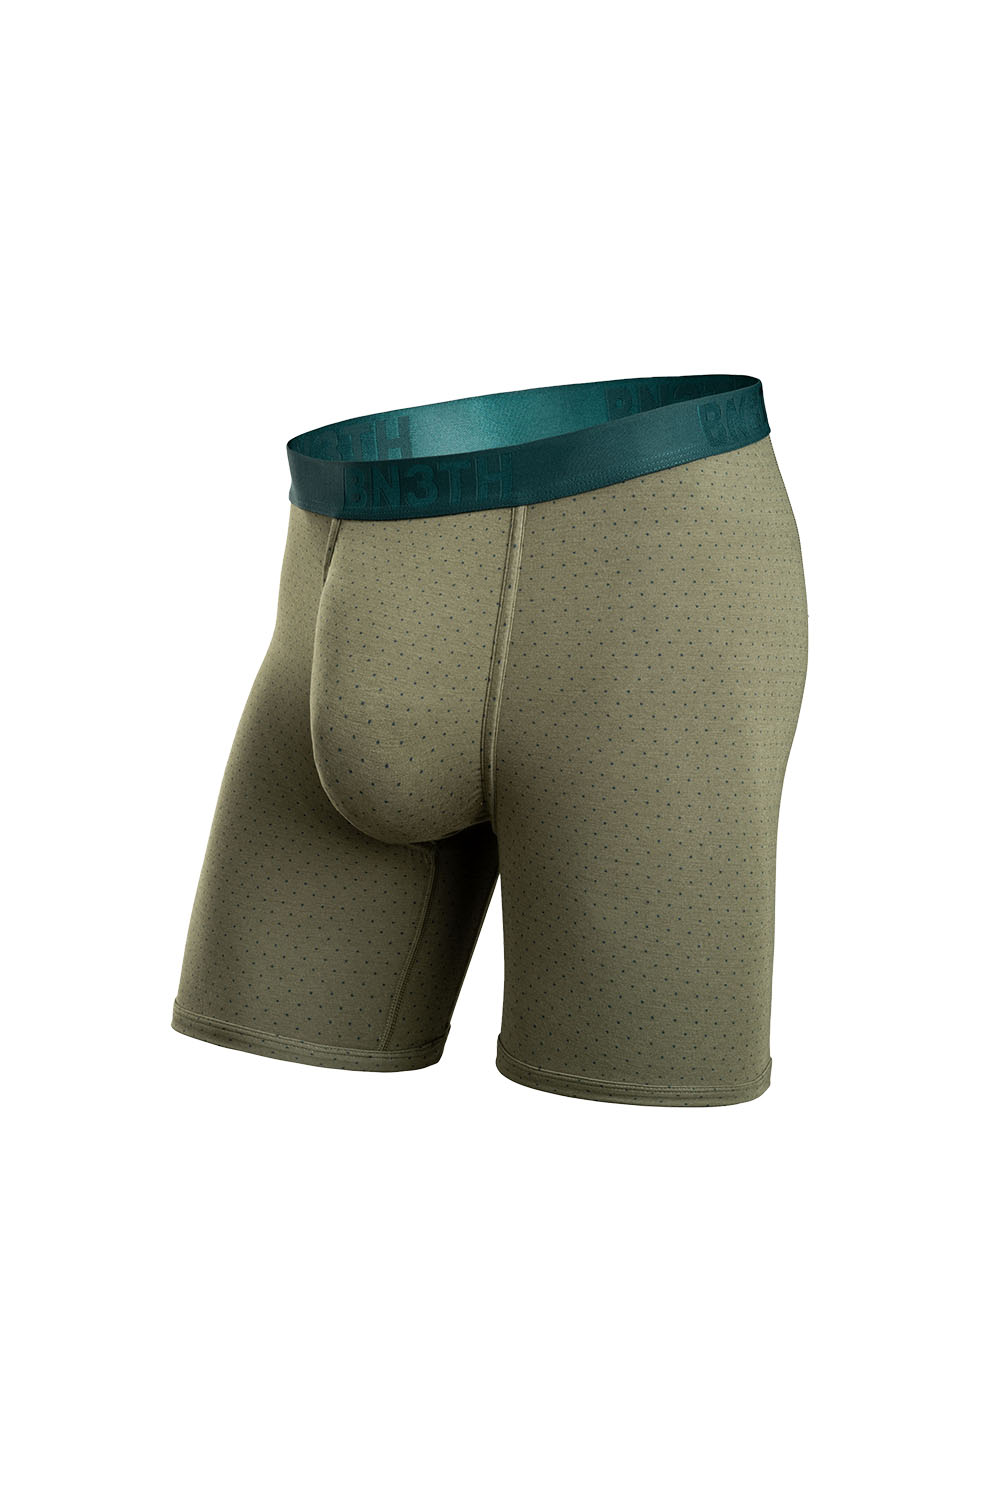 BN3TH - Classic Boxer Brief with Fly - Micro Dot Pine - Front